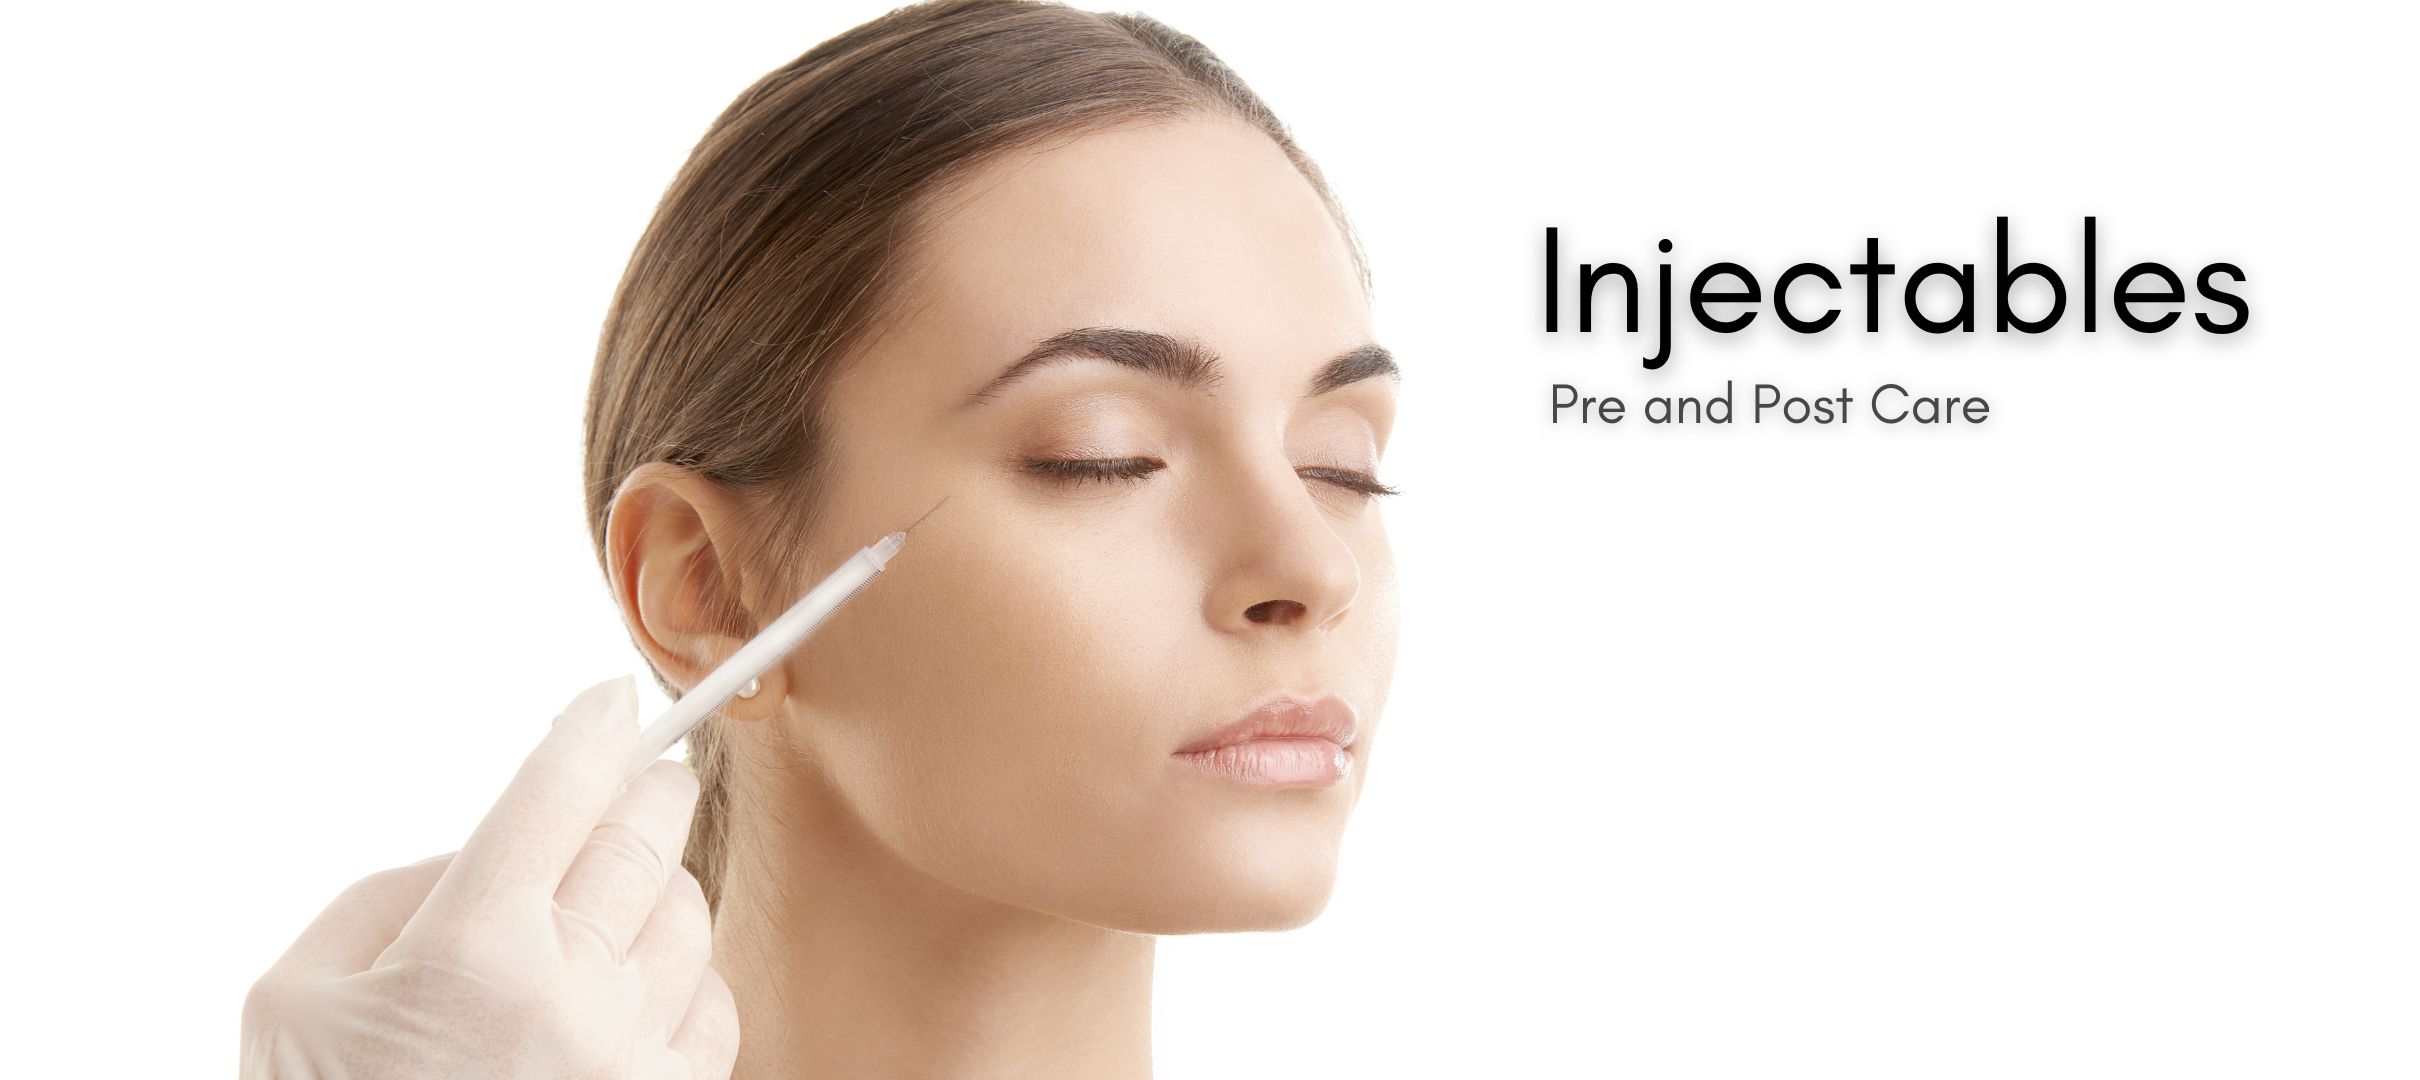 Injectables Pre and Post Care